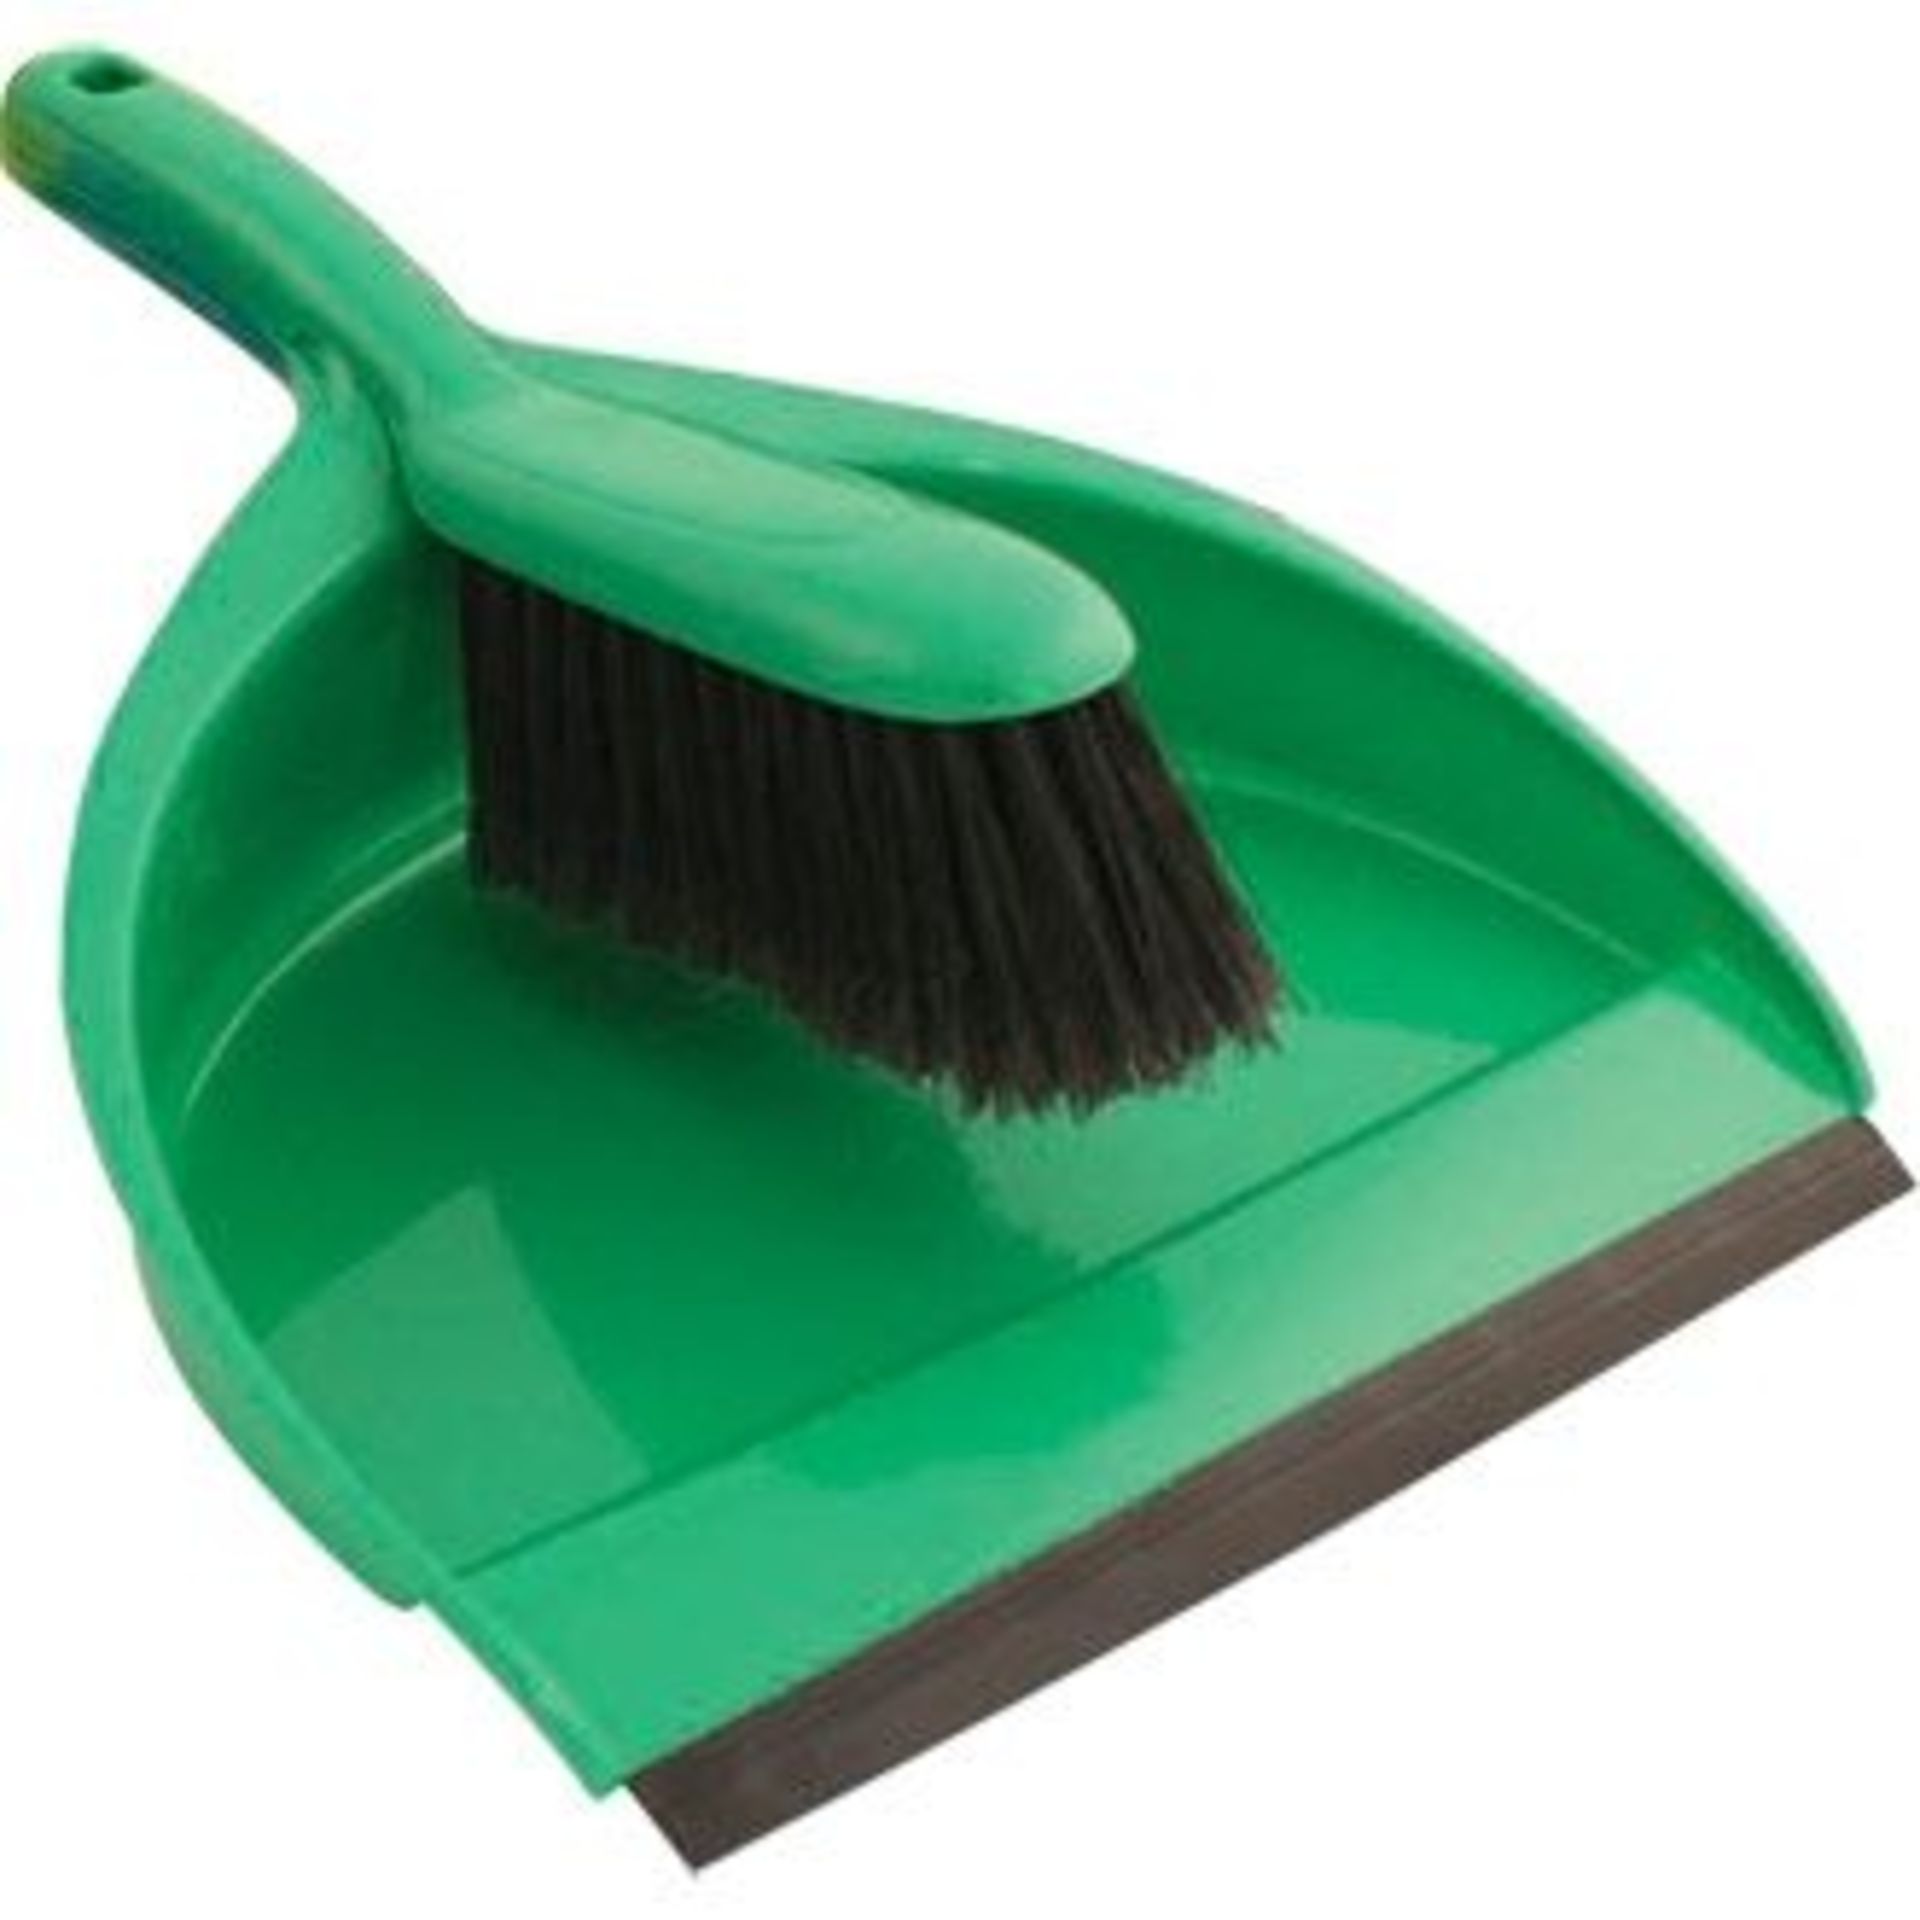 V Brand New Six Dustpan & Brush Sets X 2 YOUR BID PRICE TO BE MULTIPLIED BY TWO